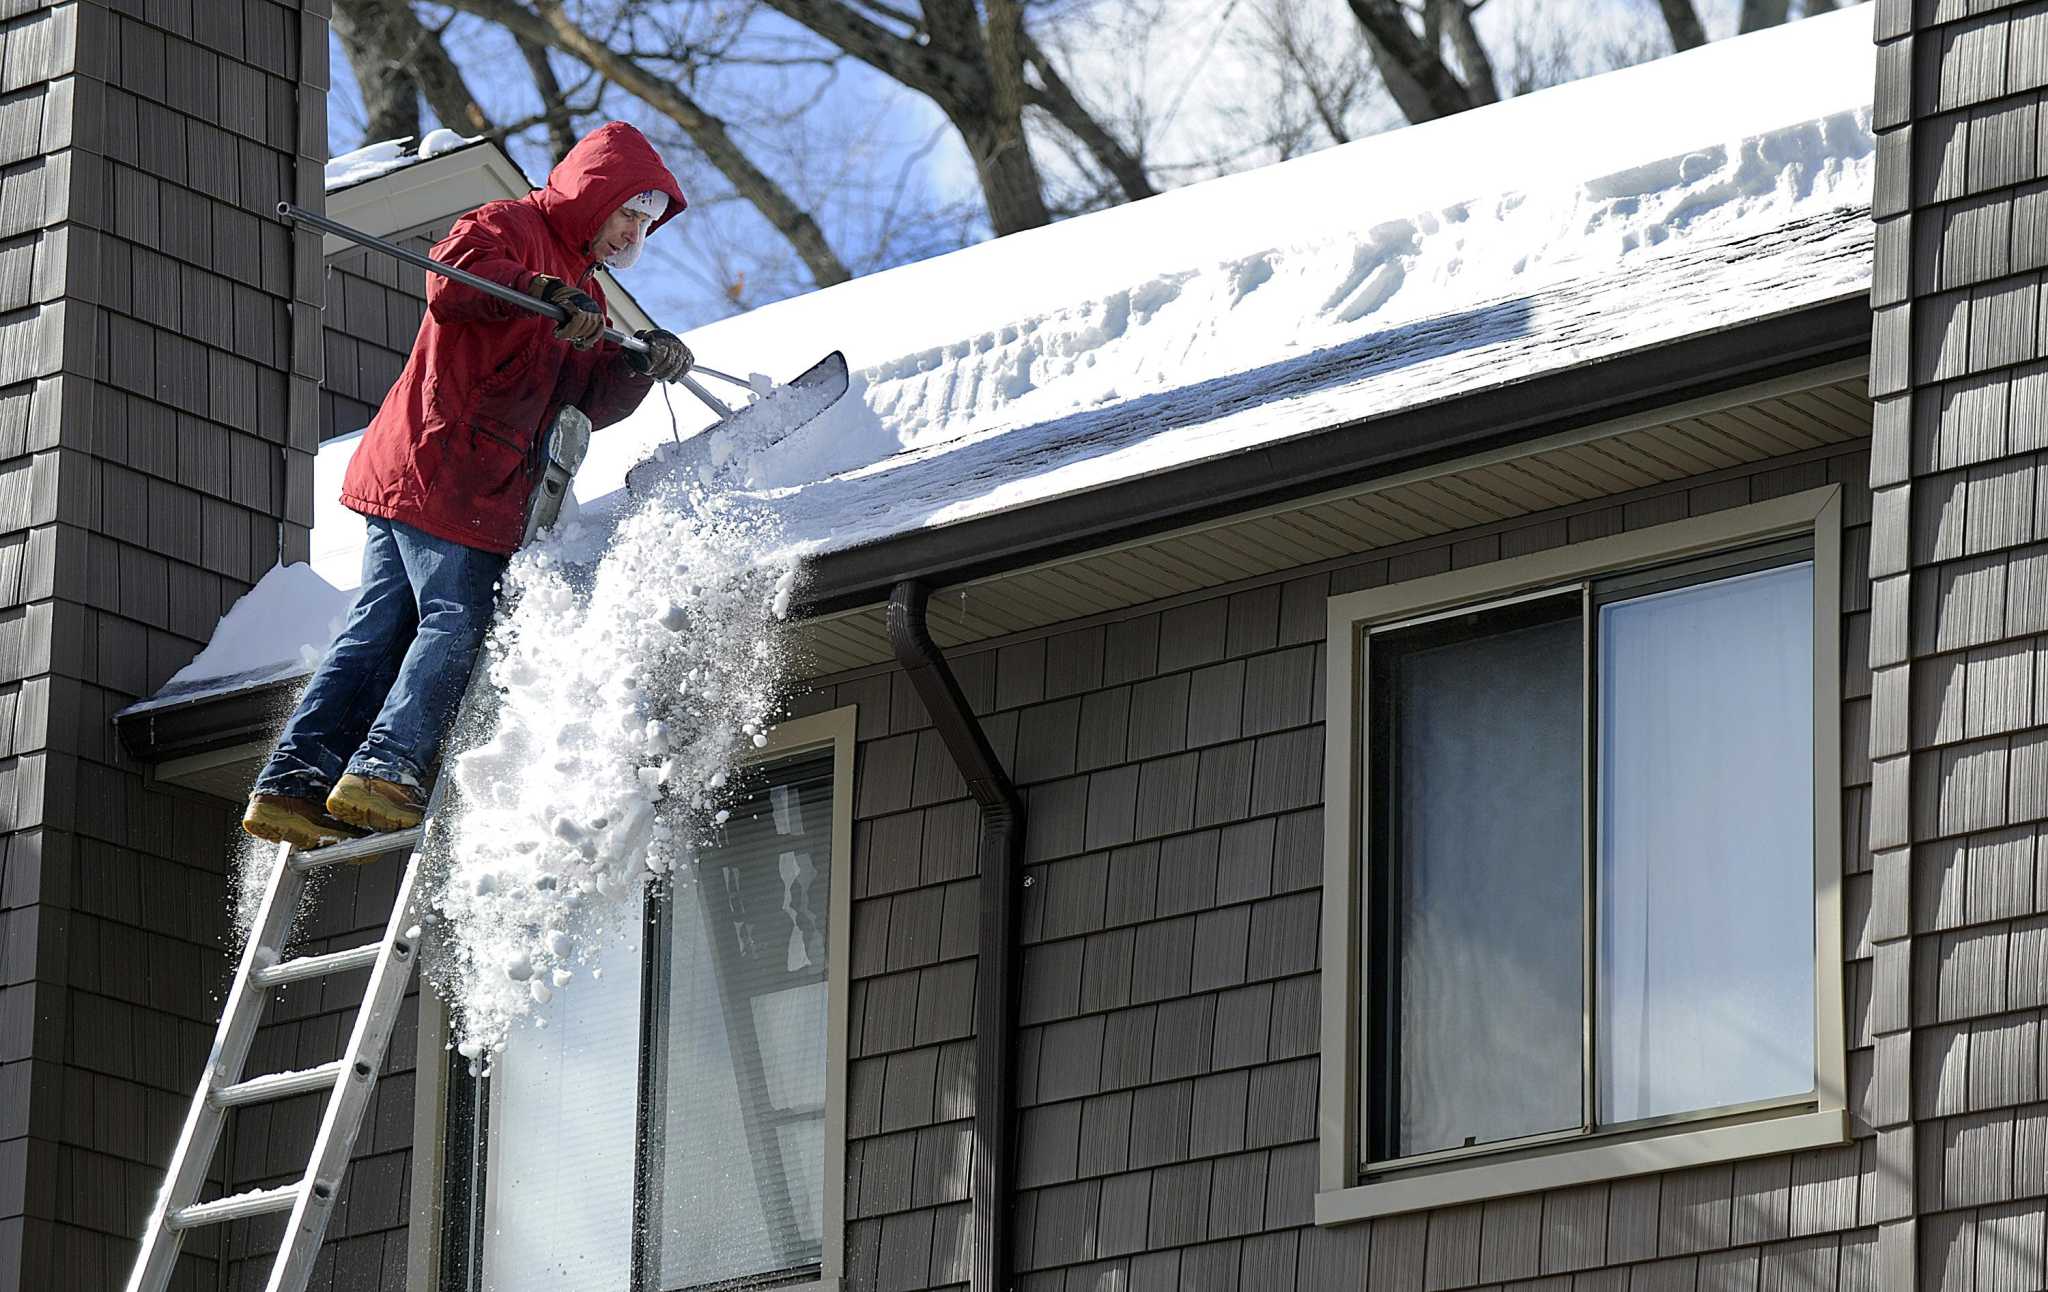 Find out if your homeowners insurance covers winter storm damage